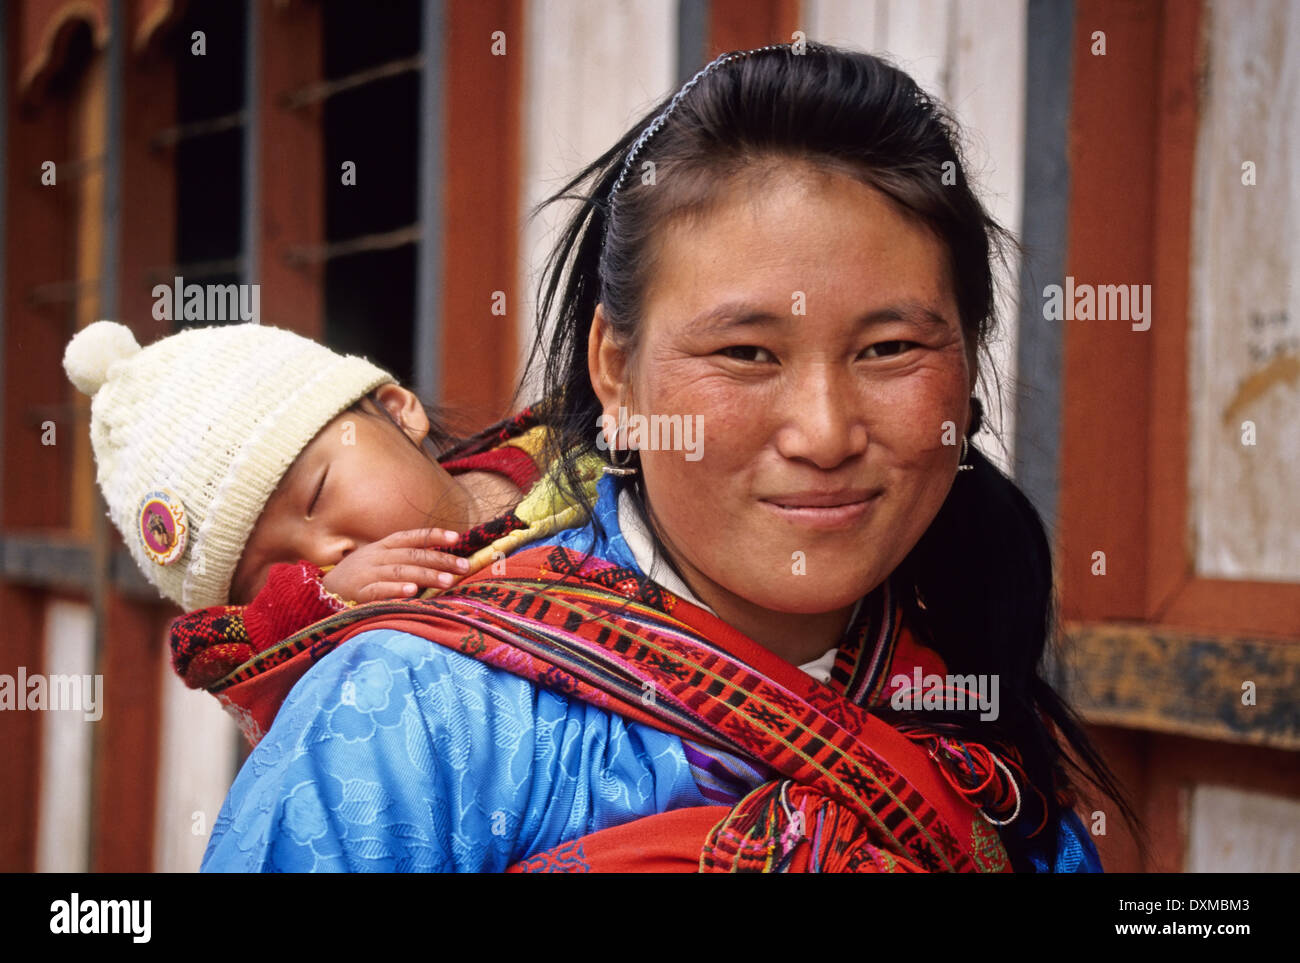 Woman carrying a baby in a multi-coloured sling, Jakar, Bhutan Stock Photo